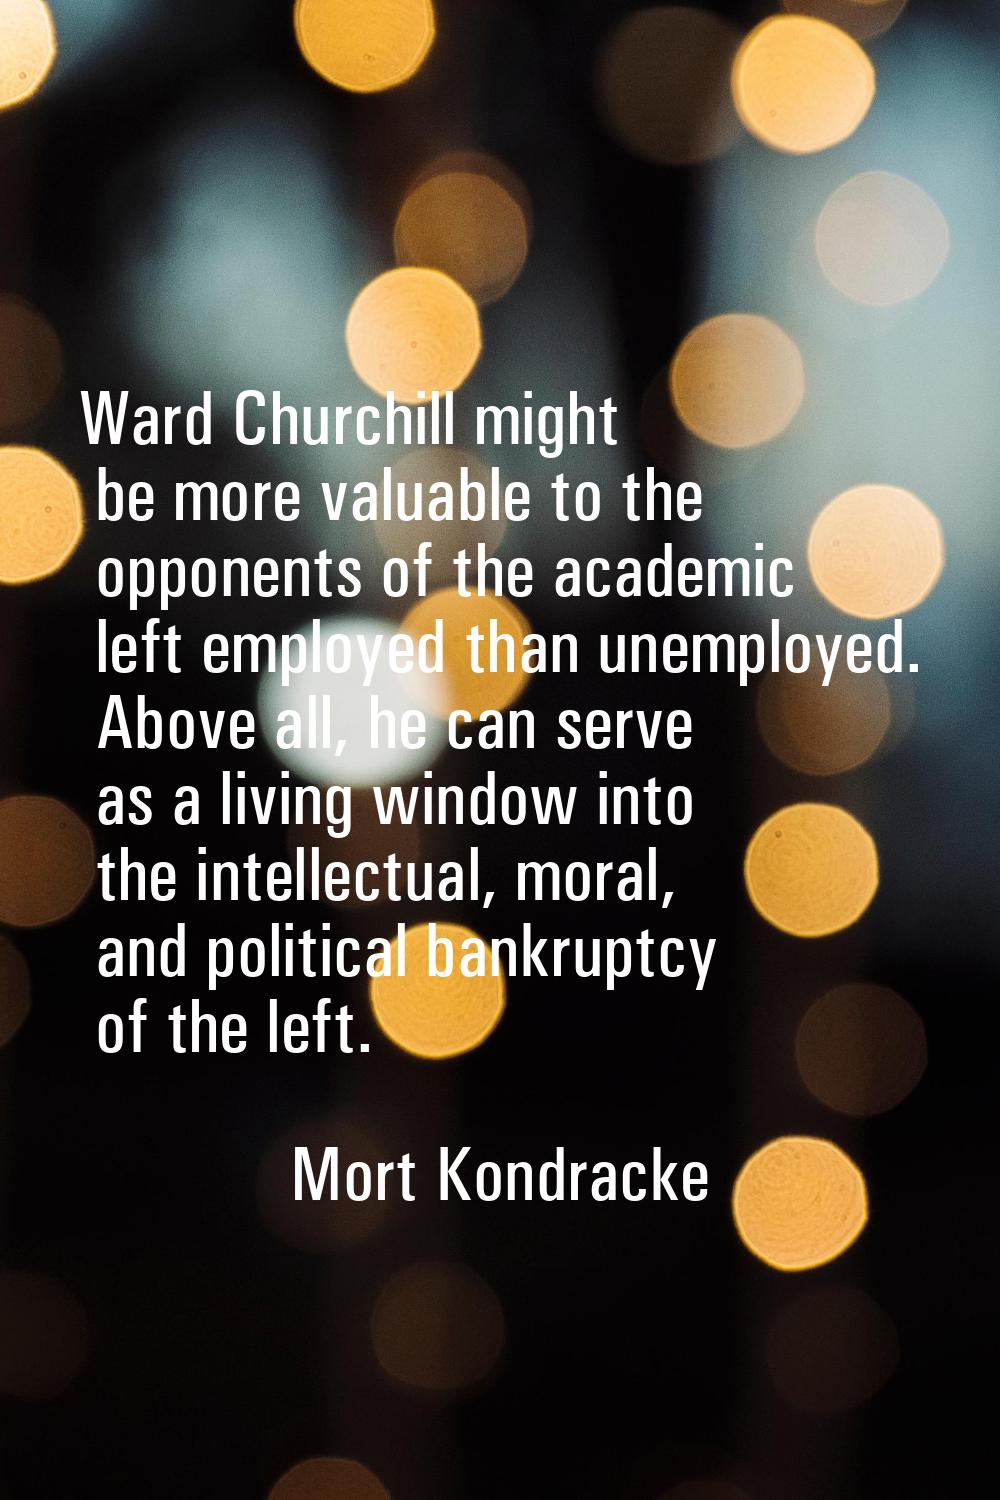 Ward Churchill might be more valuable to the opponents of the academic left employed than unemploye